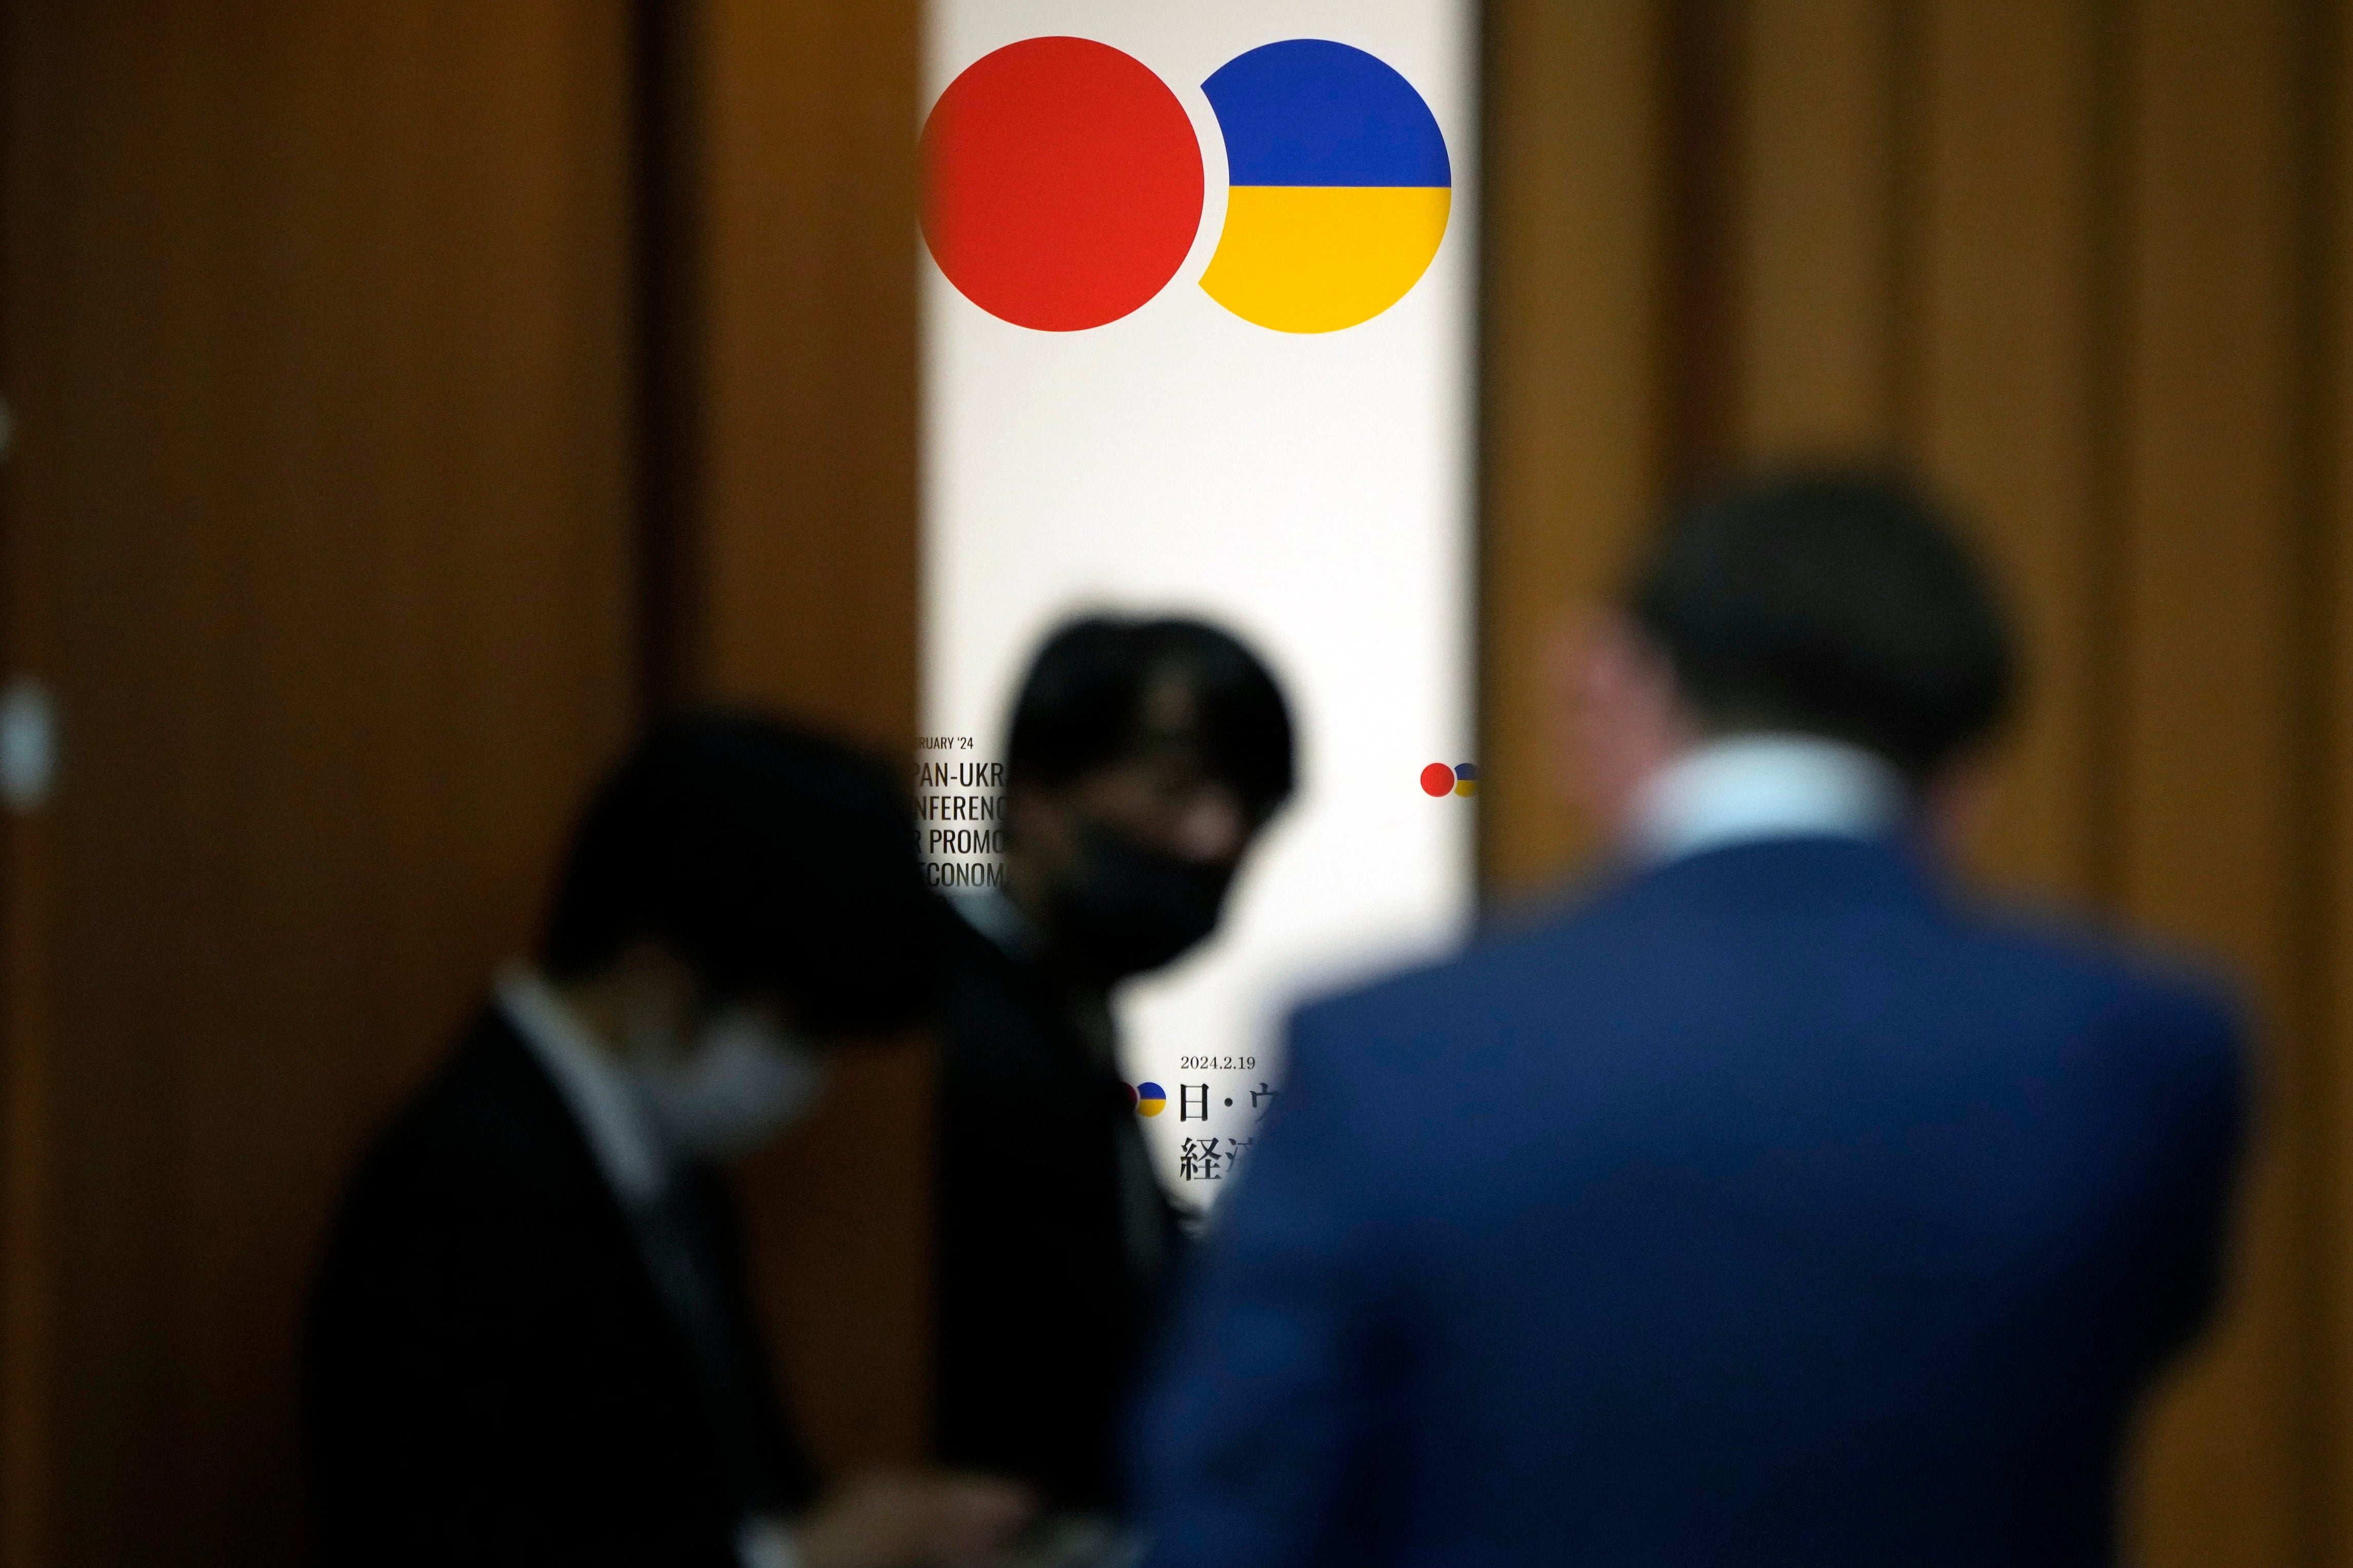 Japan is hosting a conference for Japanese and Ukrainian officials to discuss reconstruction of Ukraine just ahead of the two-year anniversary of Russia’s invasion